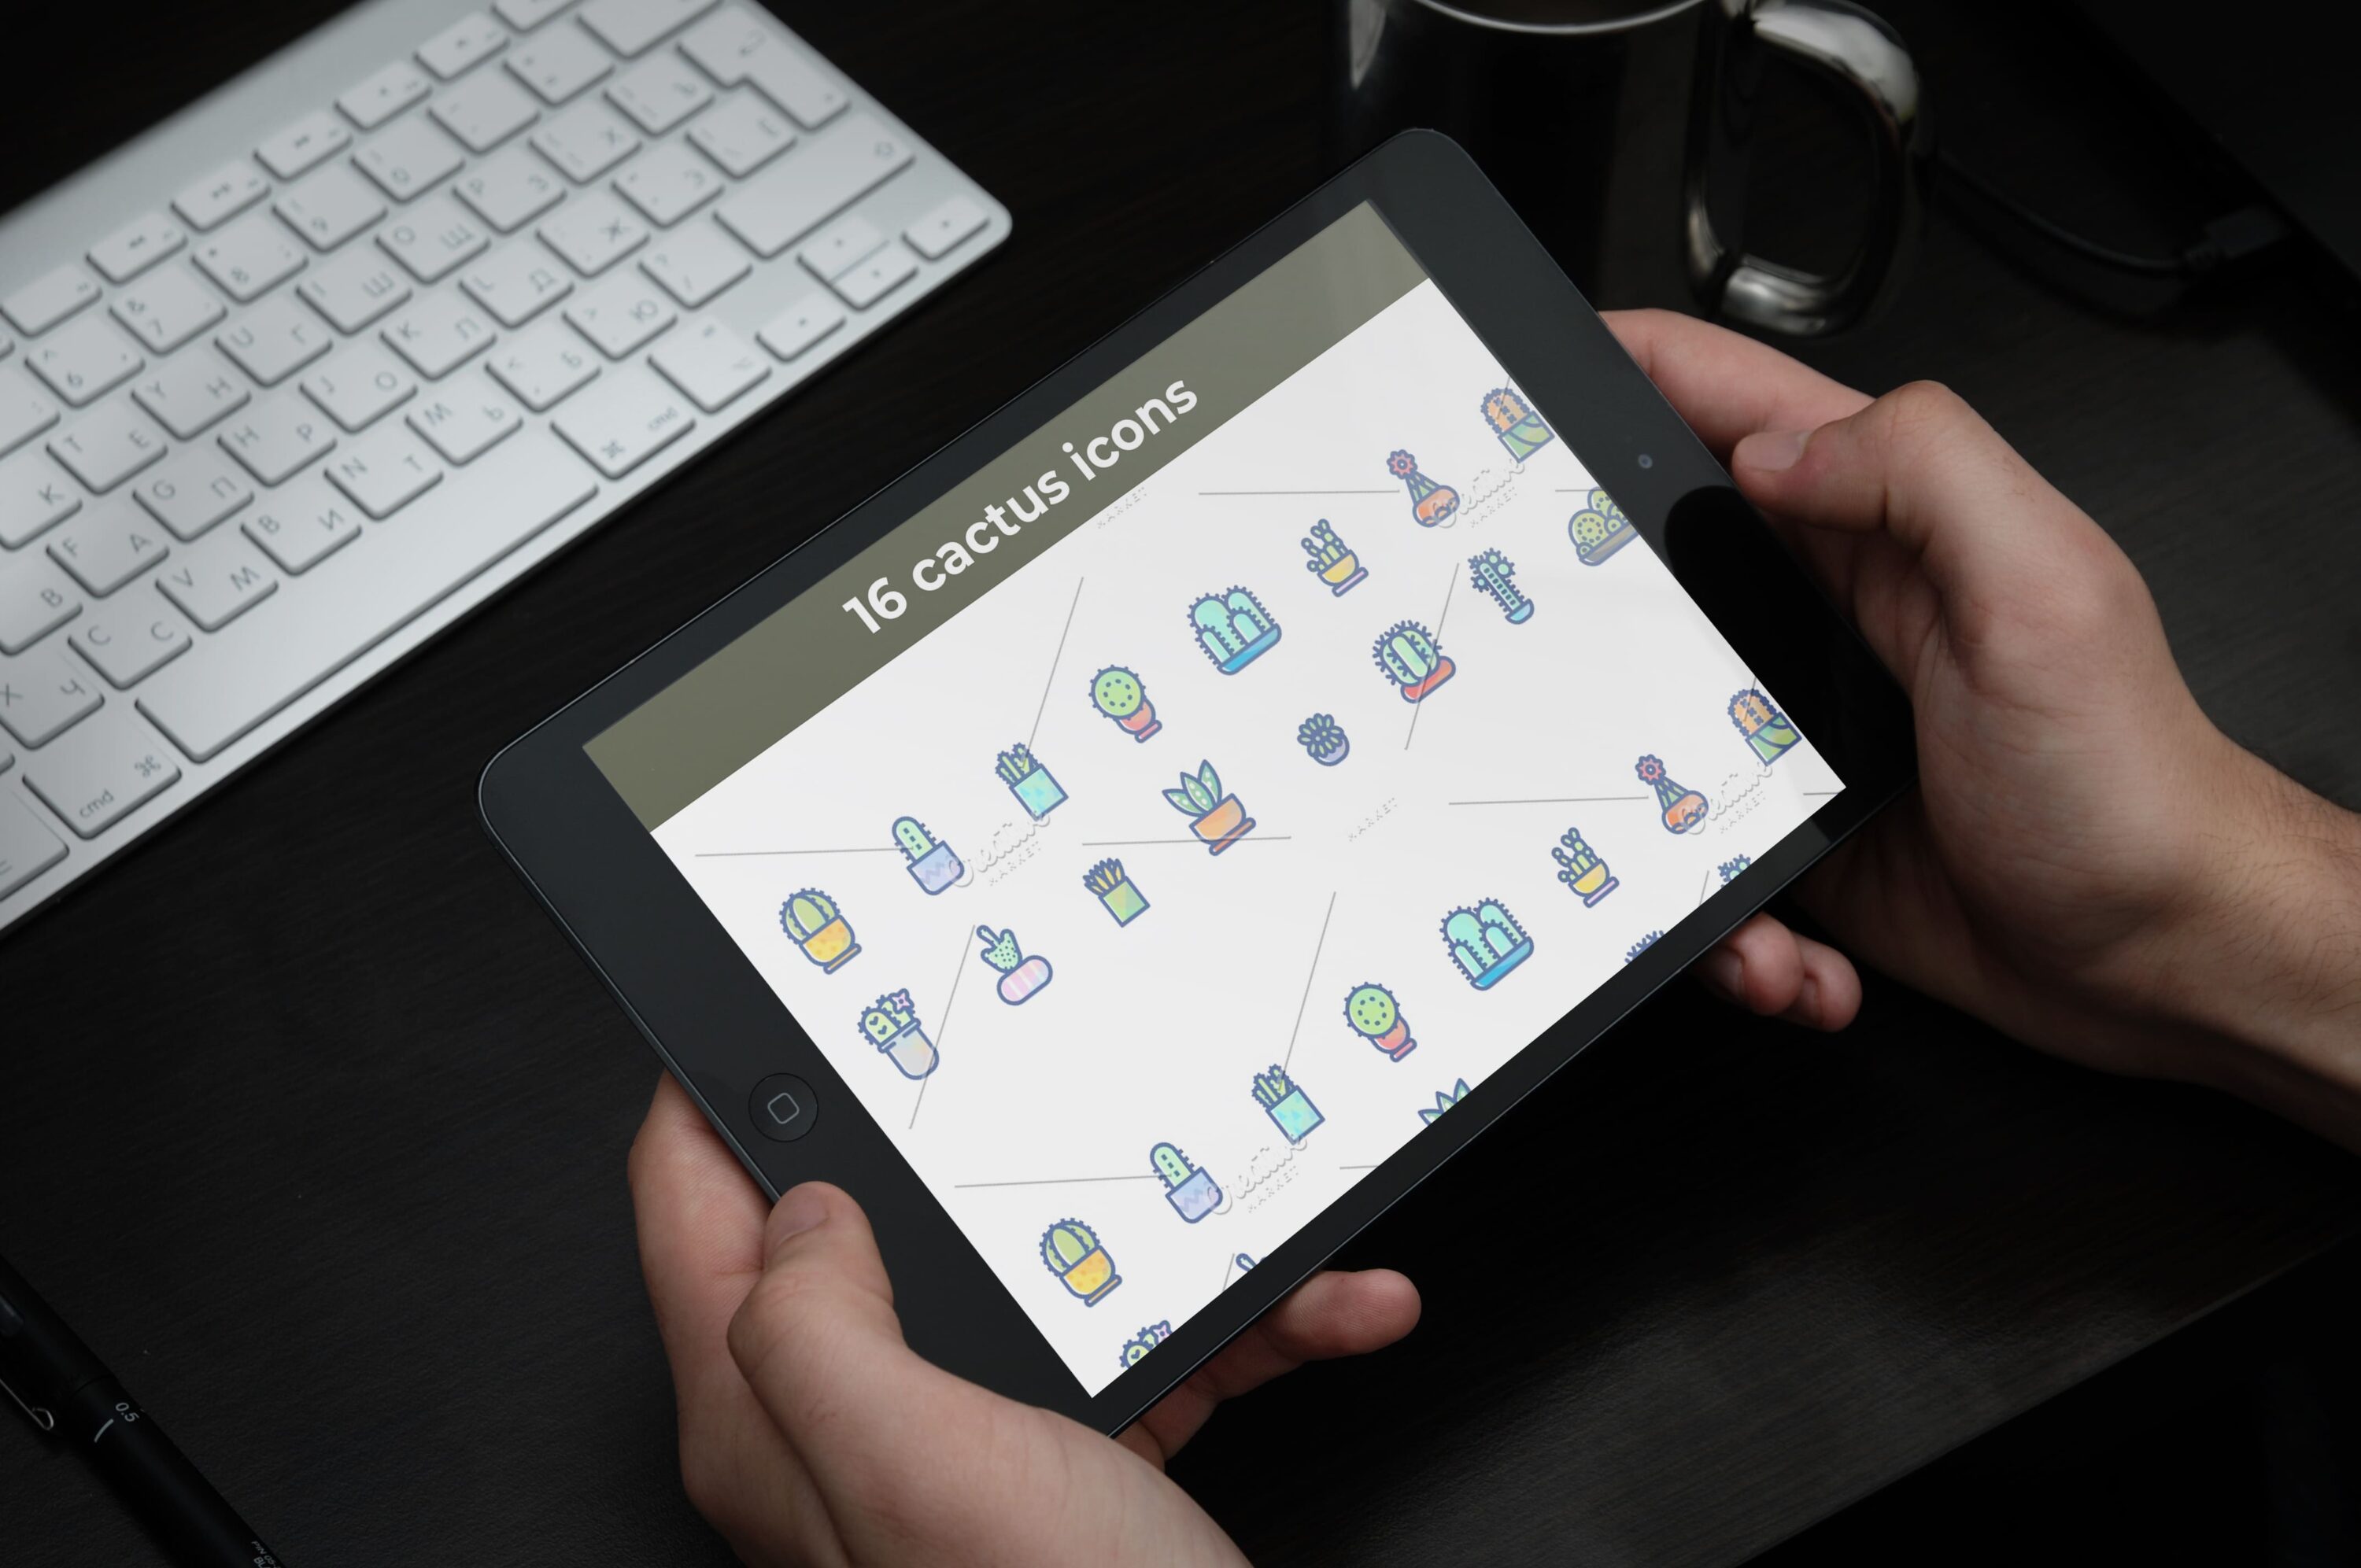 Tablet option of the 16 cactus icons.